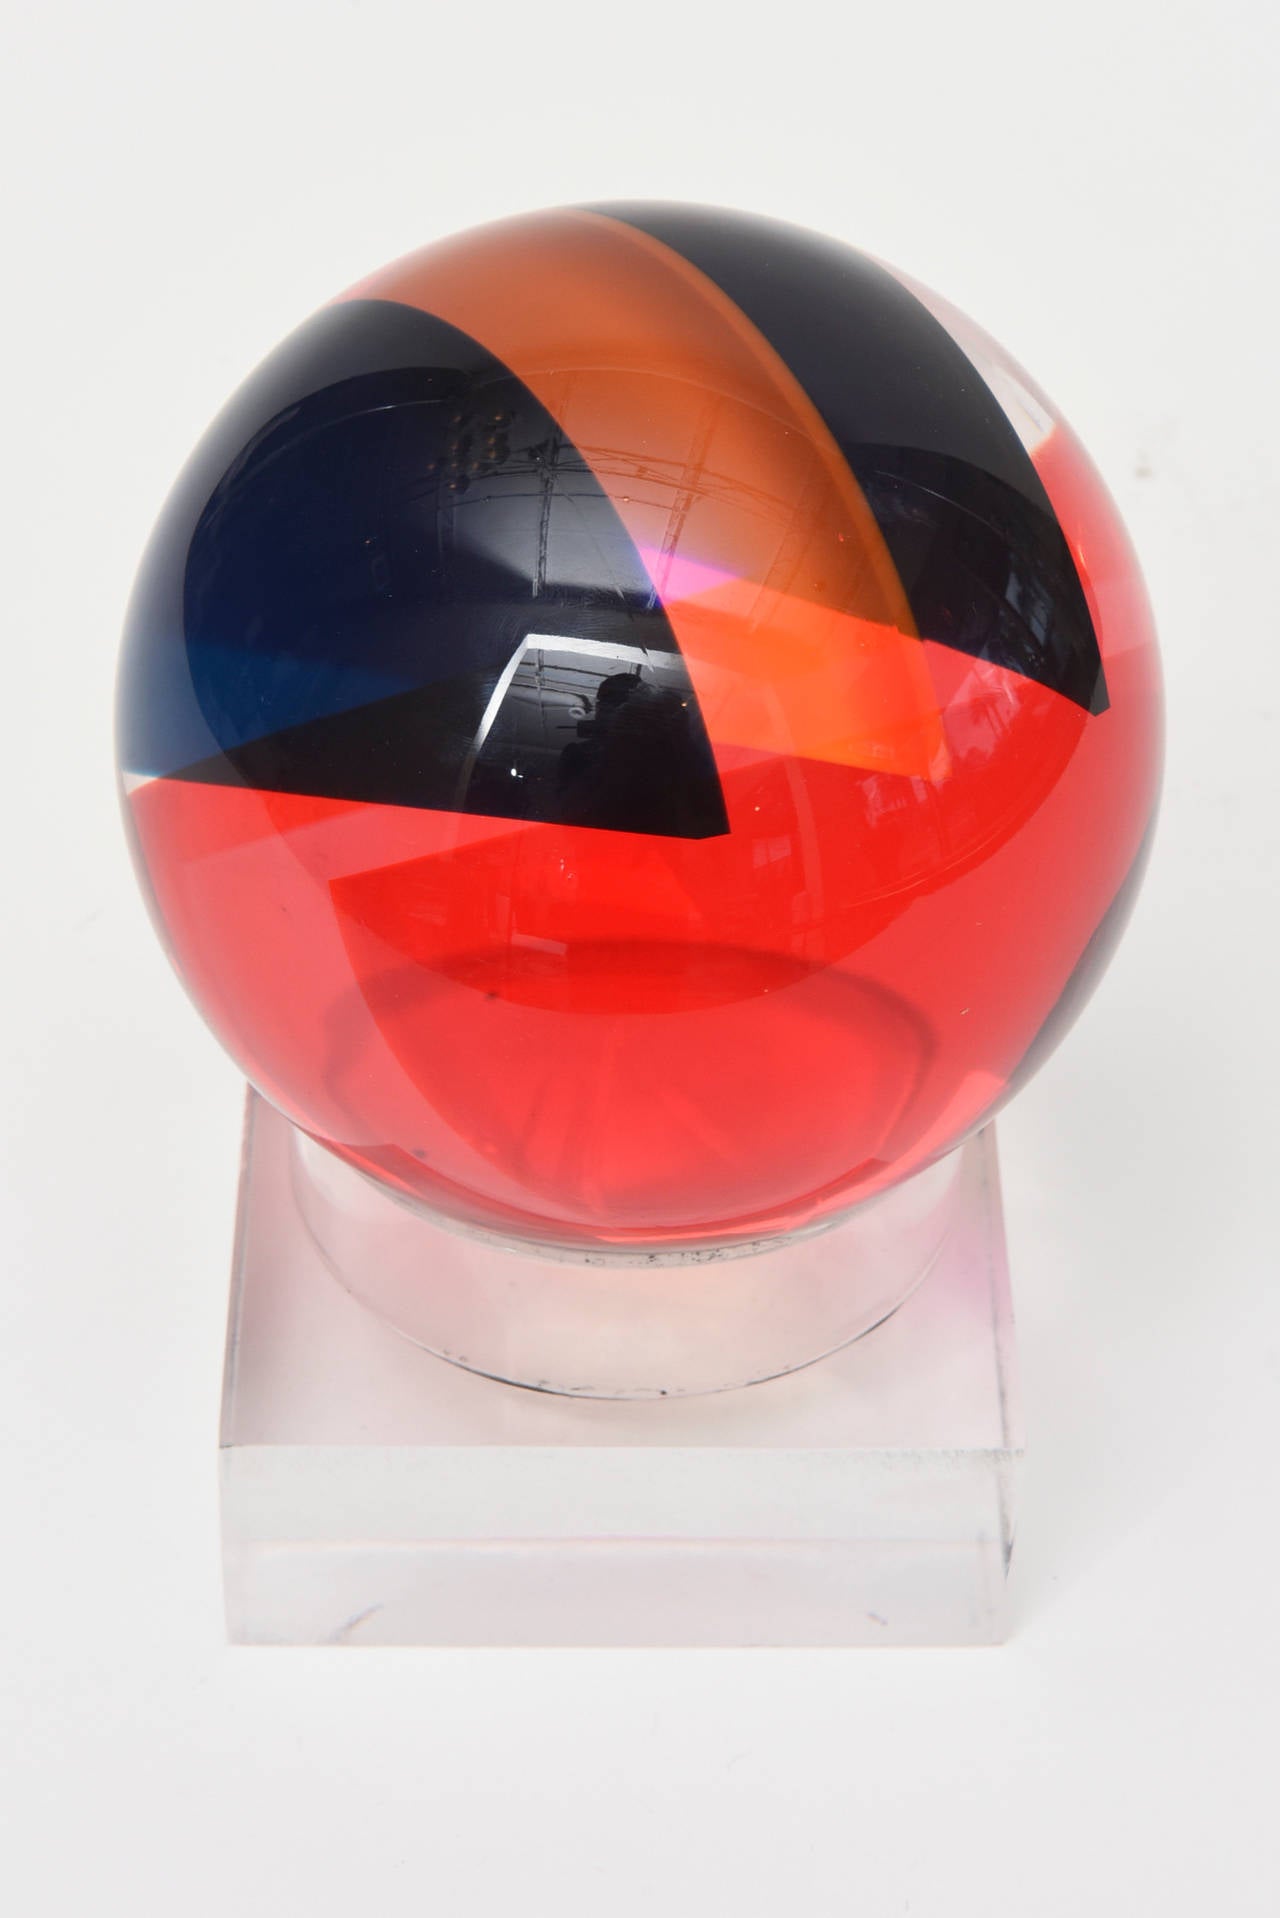 The intersecting planes of colored laminated Lucite in this fantastic signed Vasa round ball Lucite sculpture changes color with each angle and placement of the ball. It sits on a Lucite stand that is fitted for this ball. It has so many variances